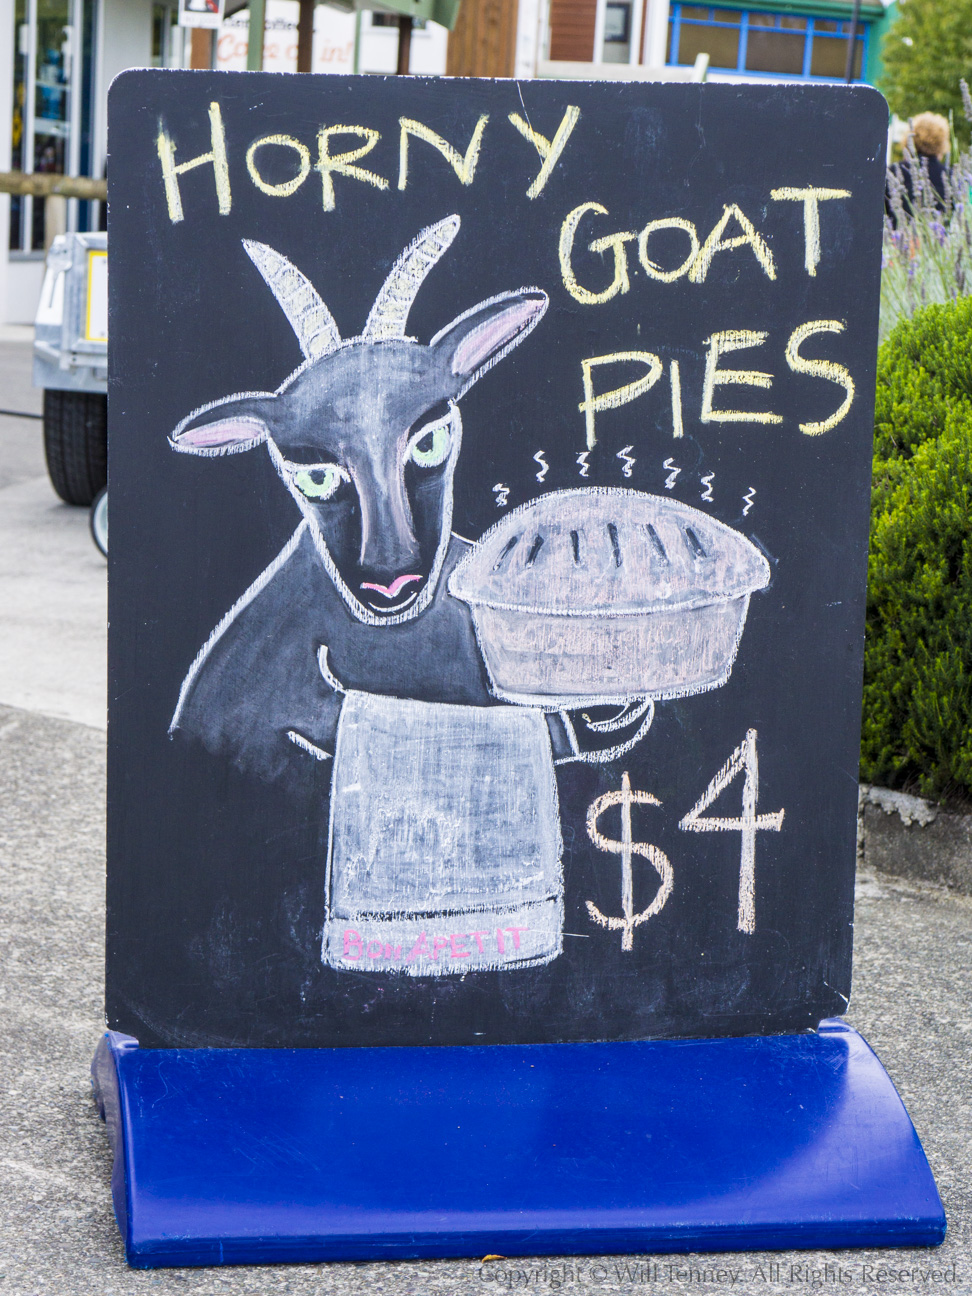 Horny Goat Pies: Photograph by Will Tenney